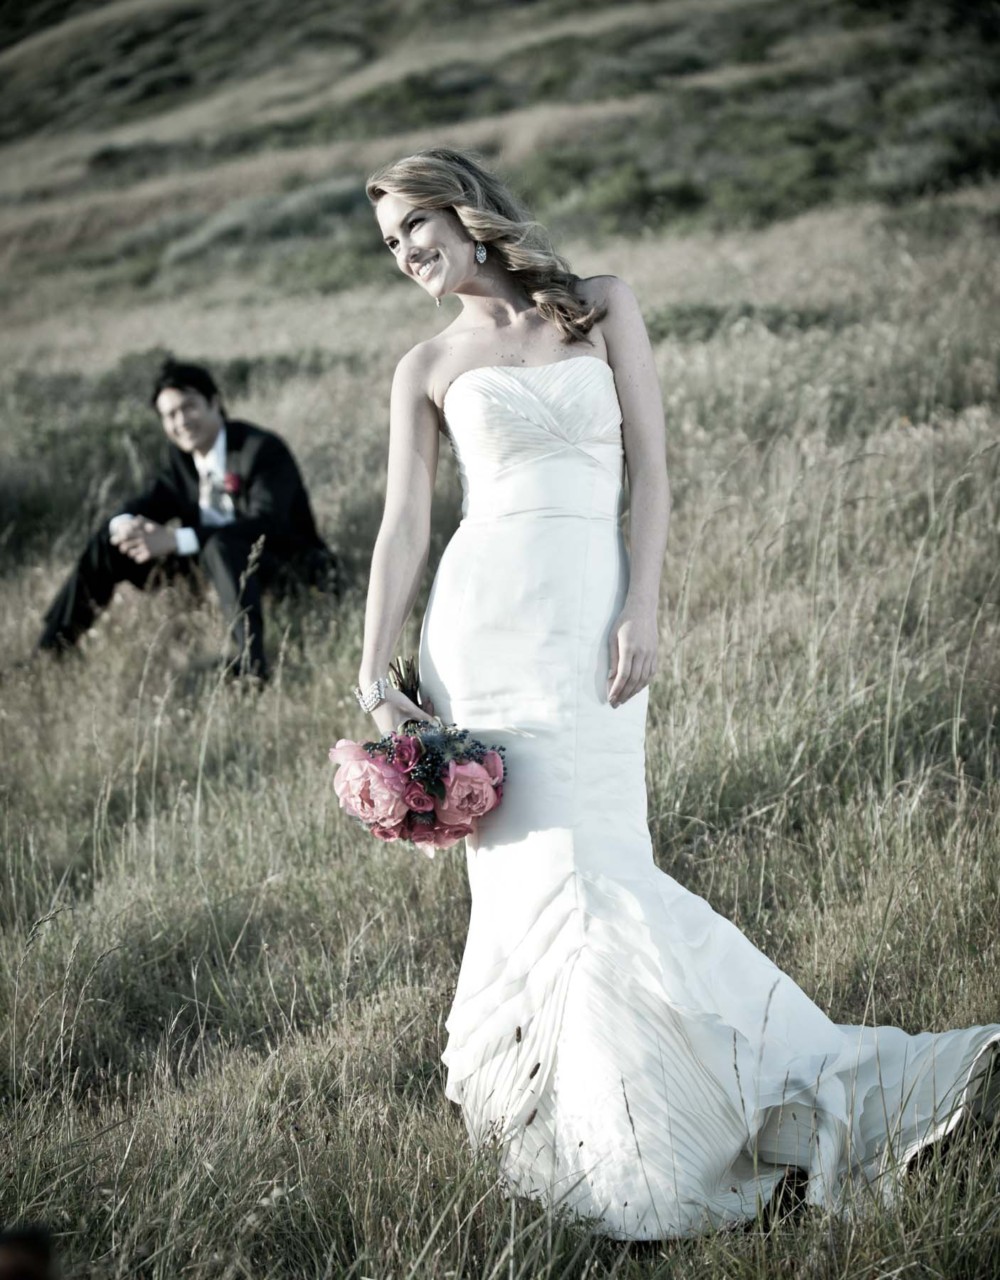 Looking for a budget wedding photographer in Palmer?